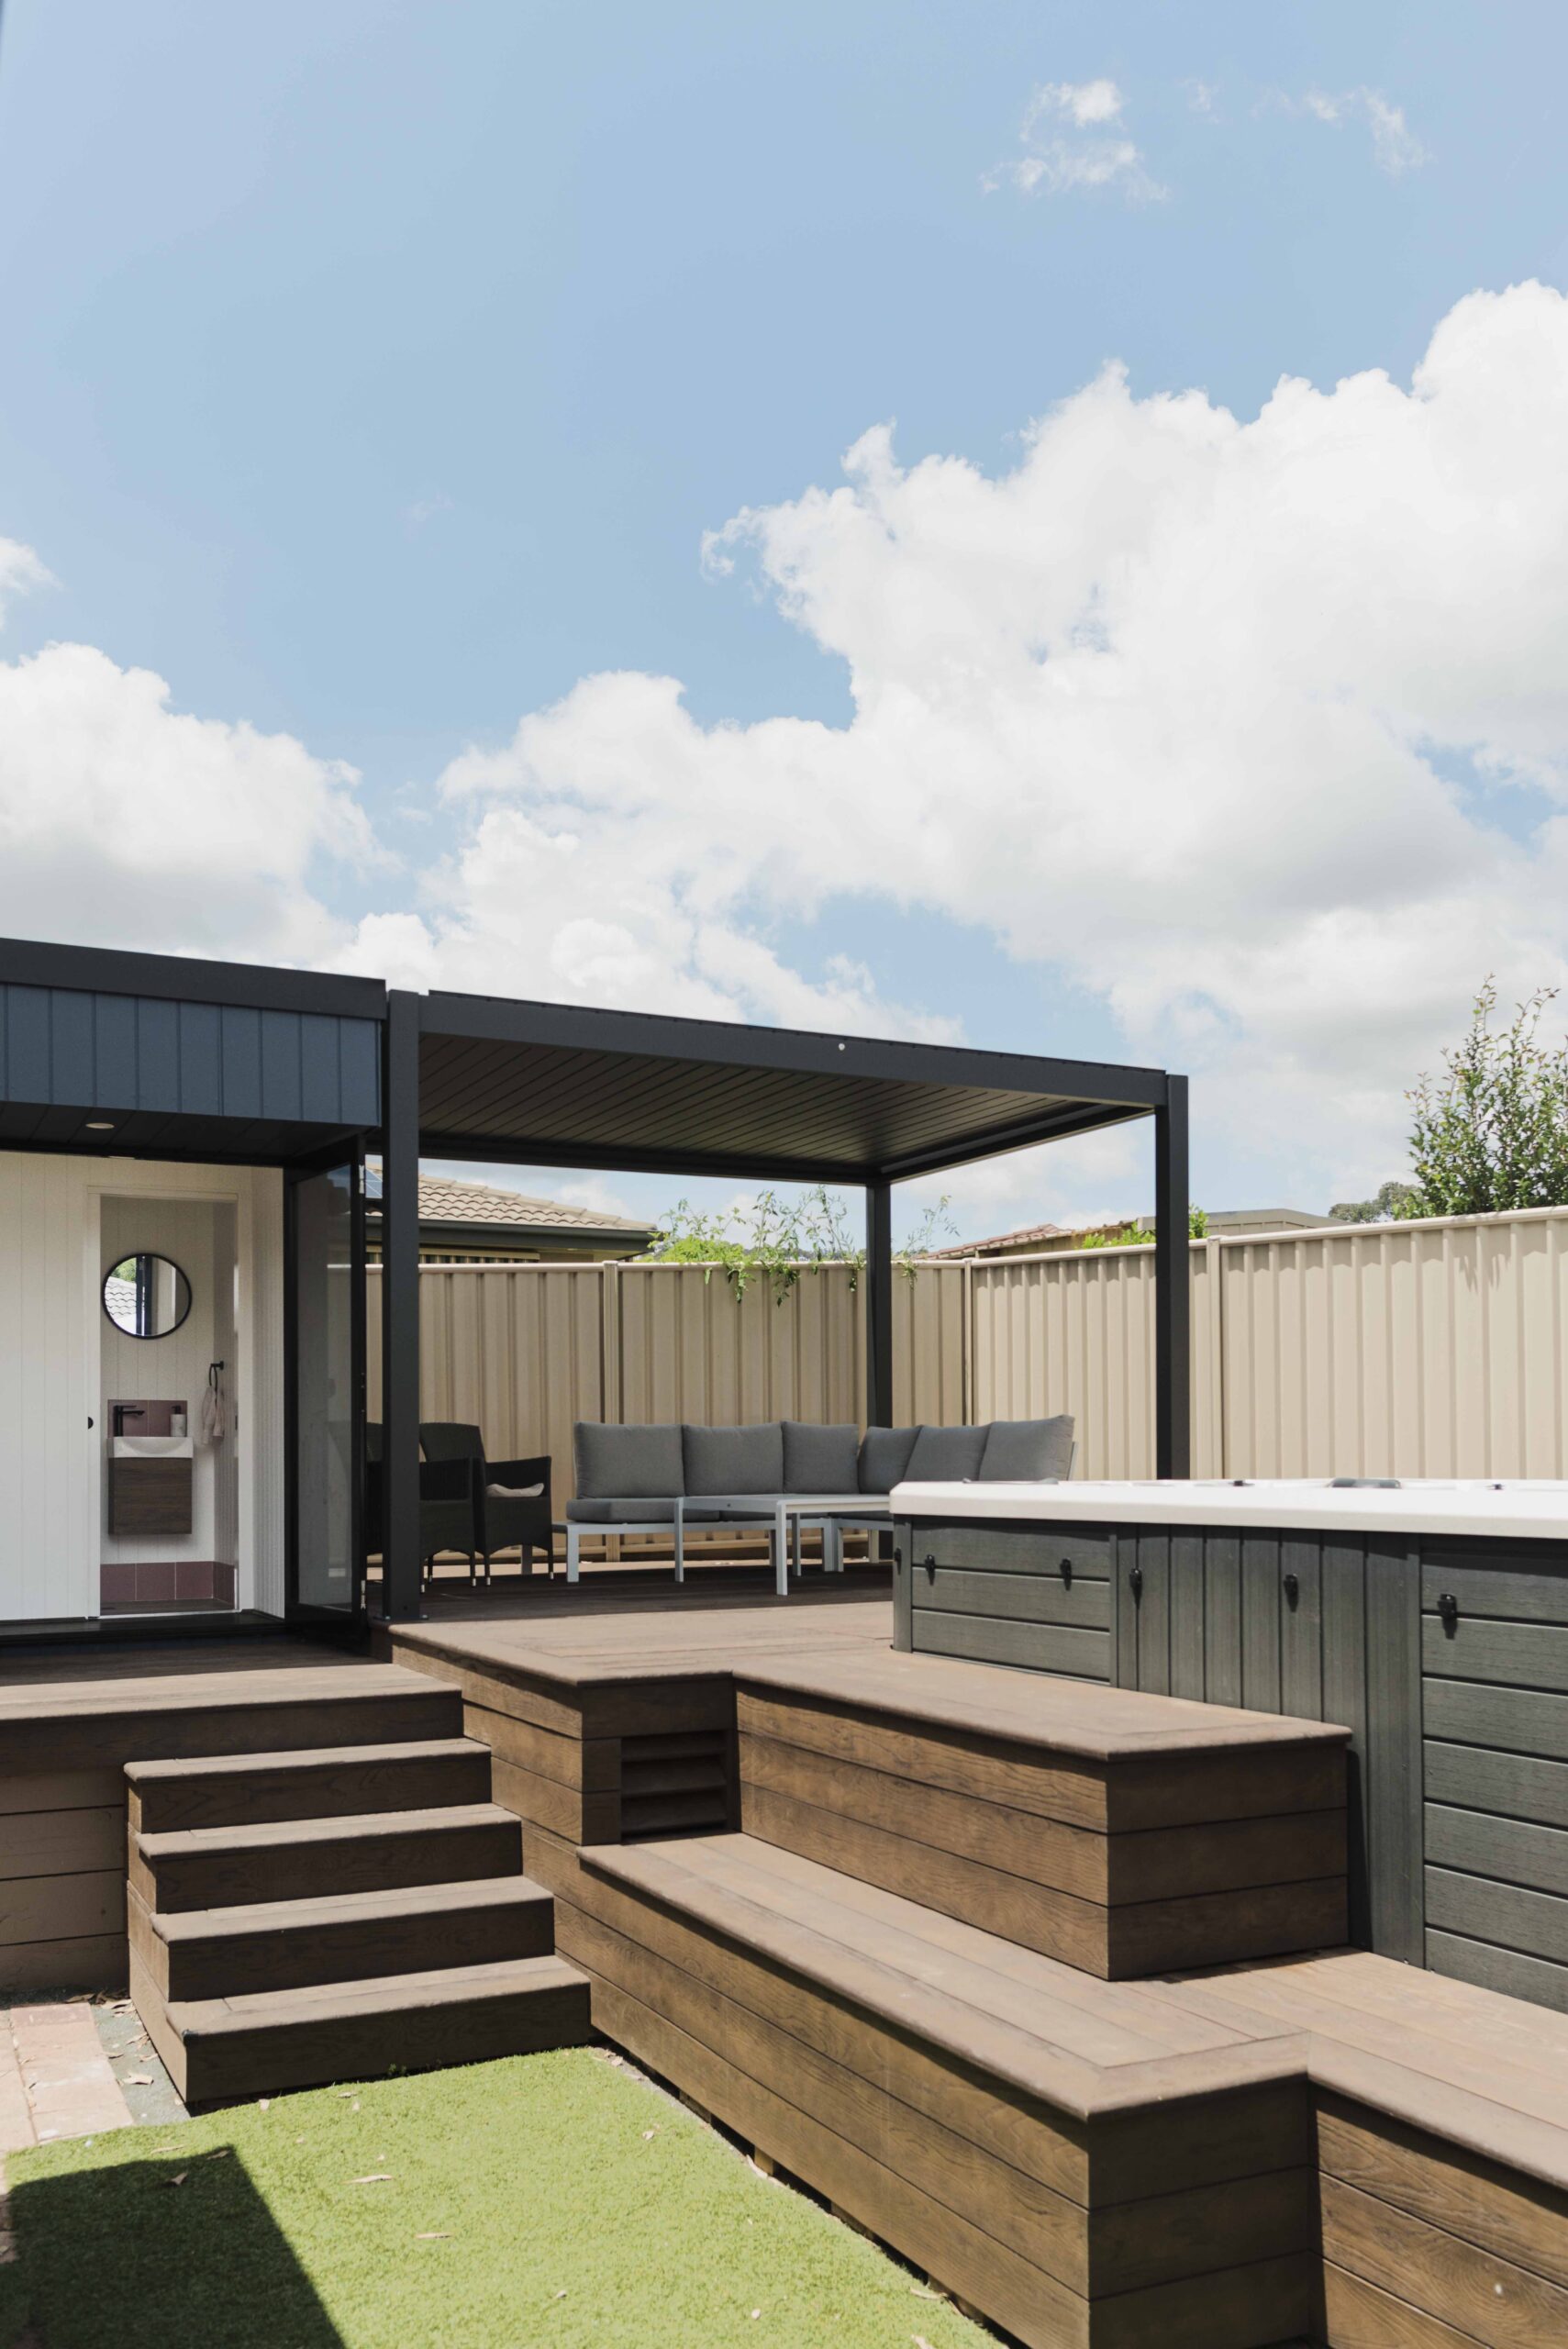 covered verandah adjoining backyard office with spa in foreground